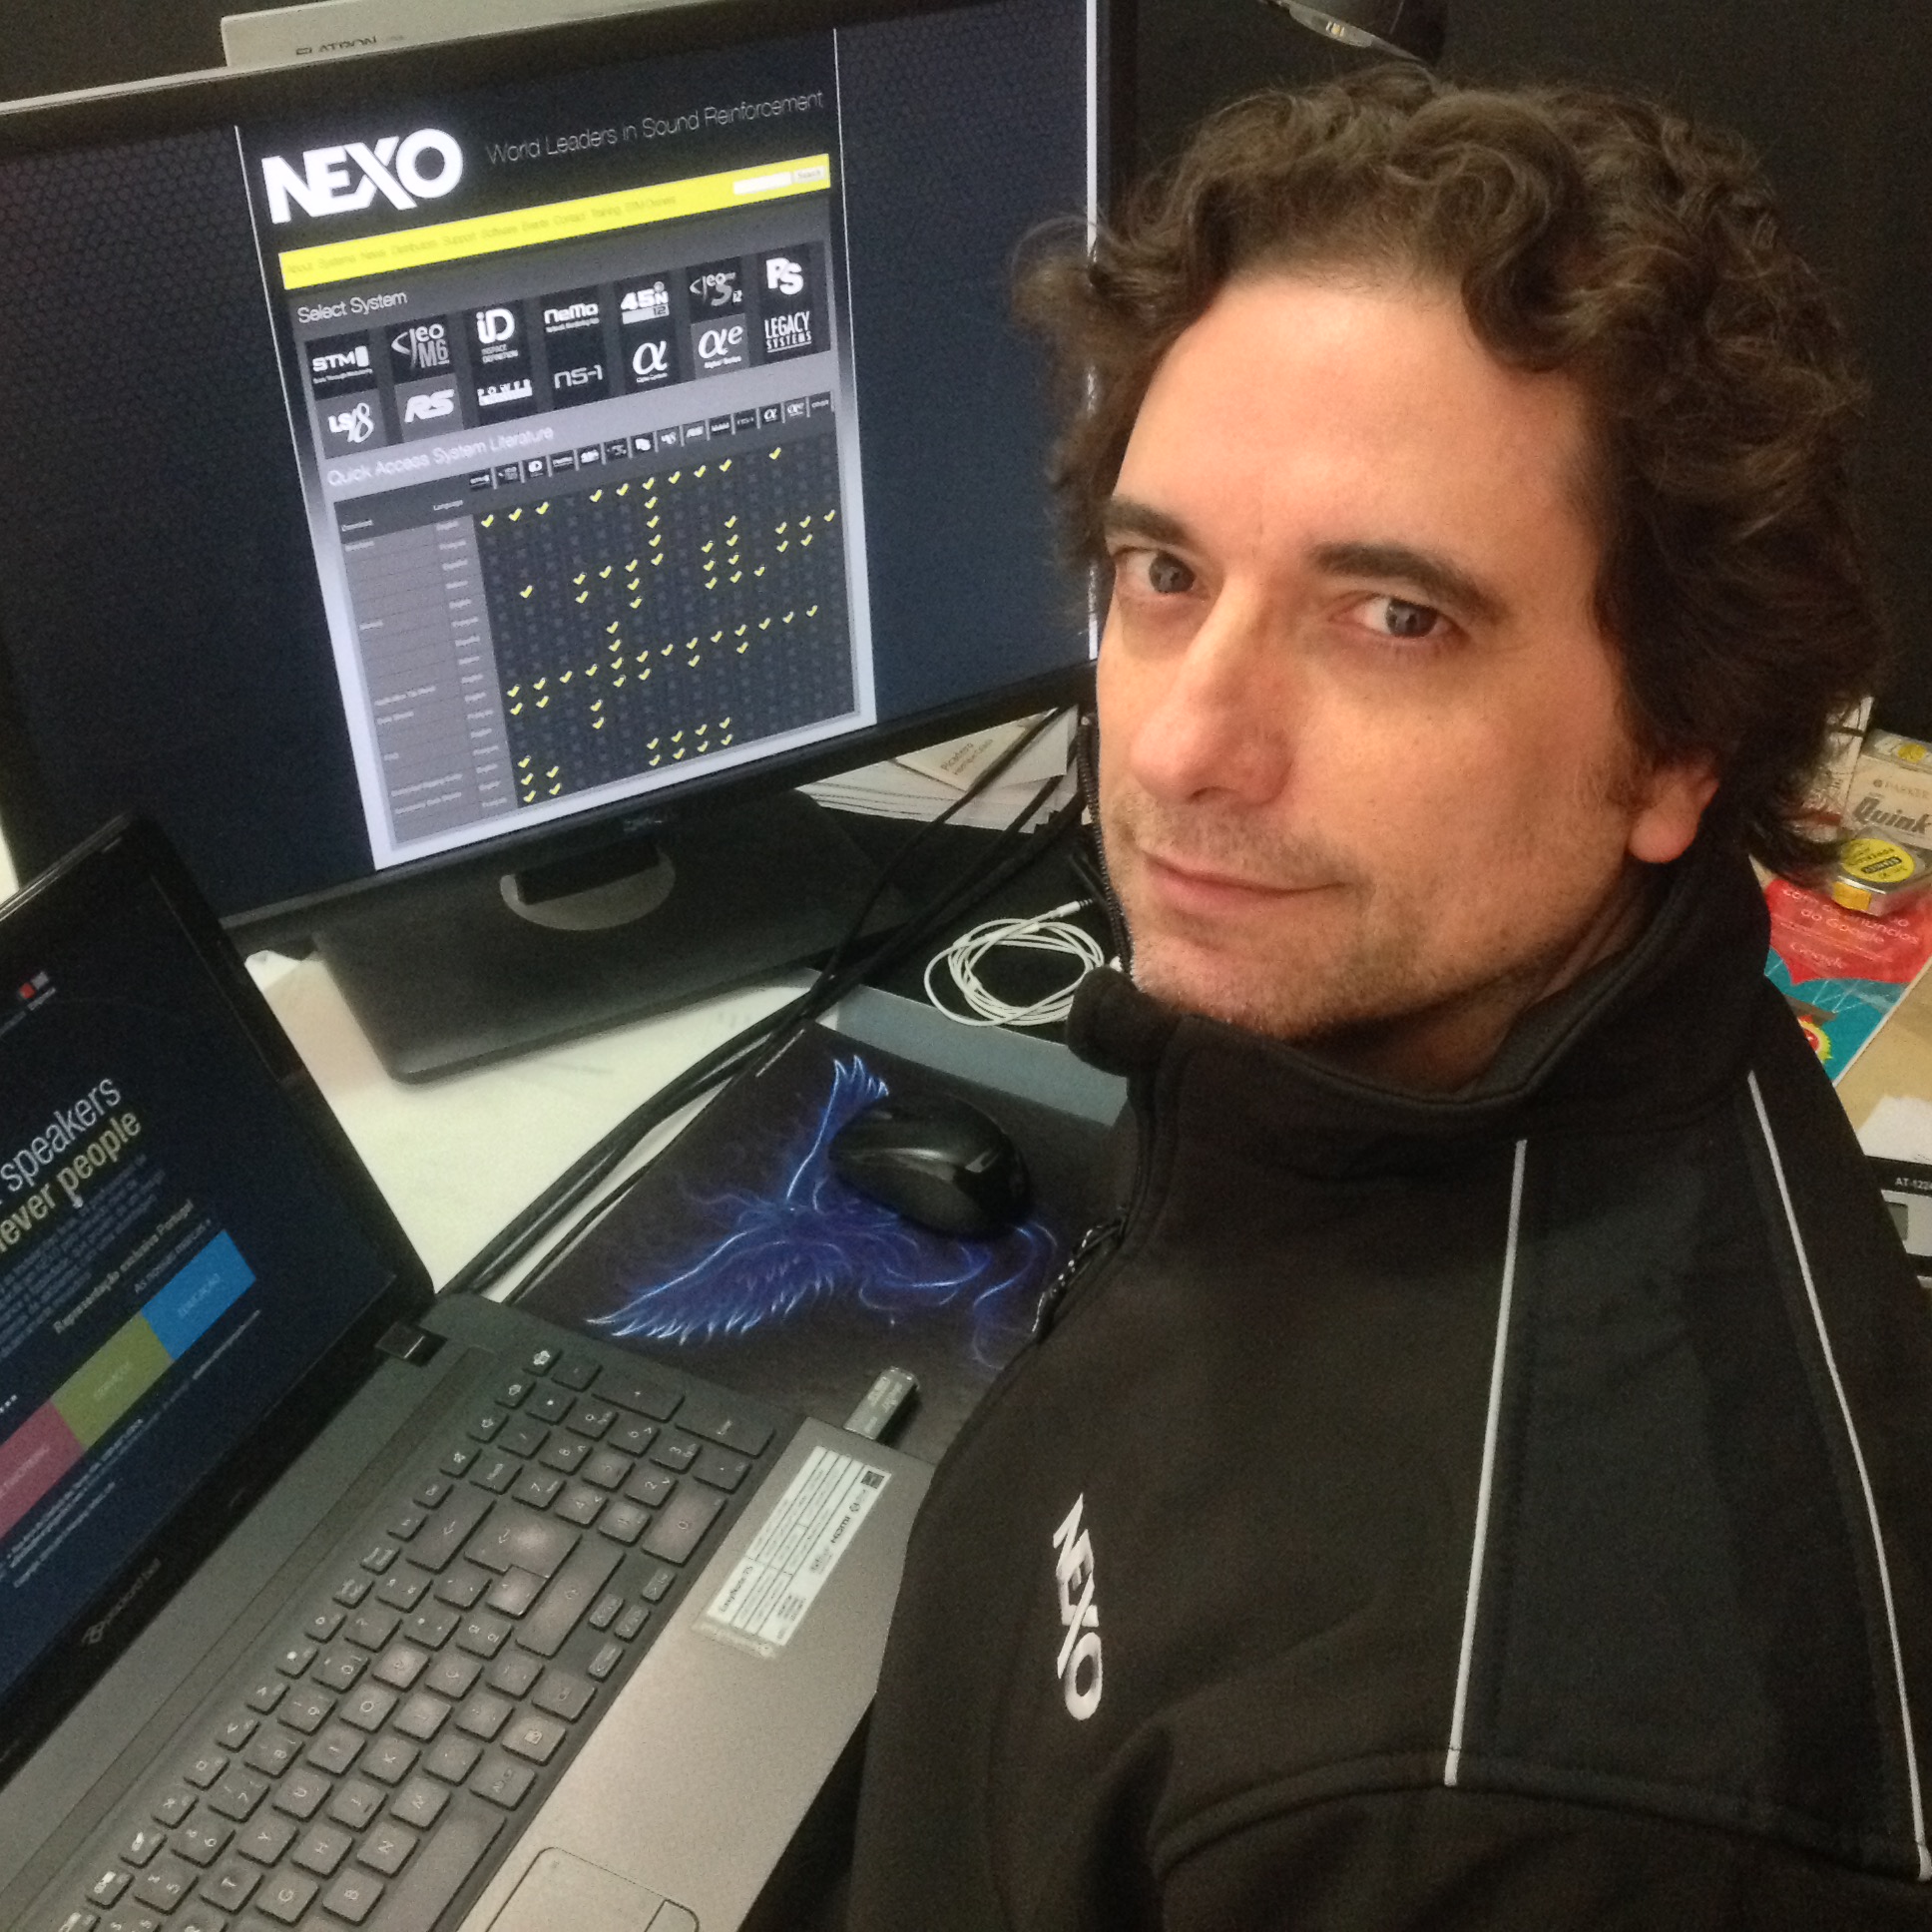 NEXO APPOINTS NEW DISTRIBUTOR IN PORTUGAL